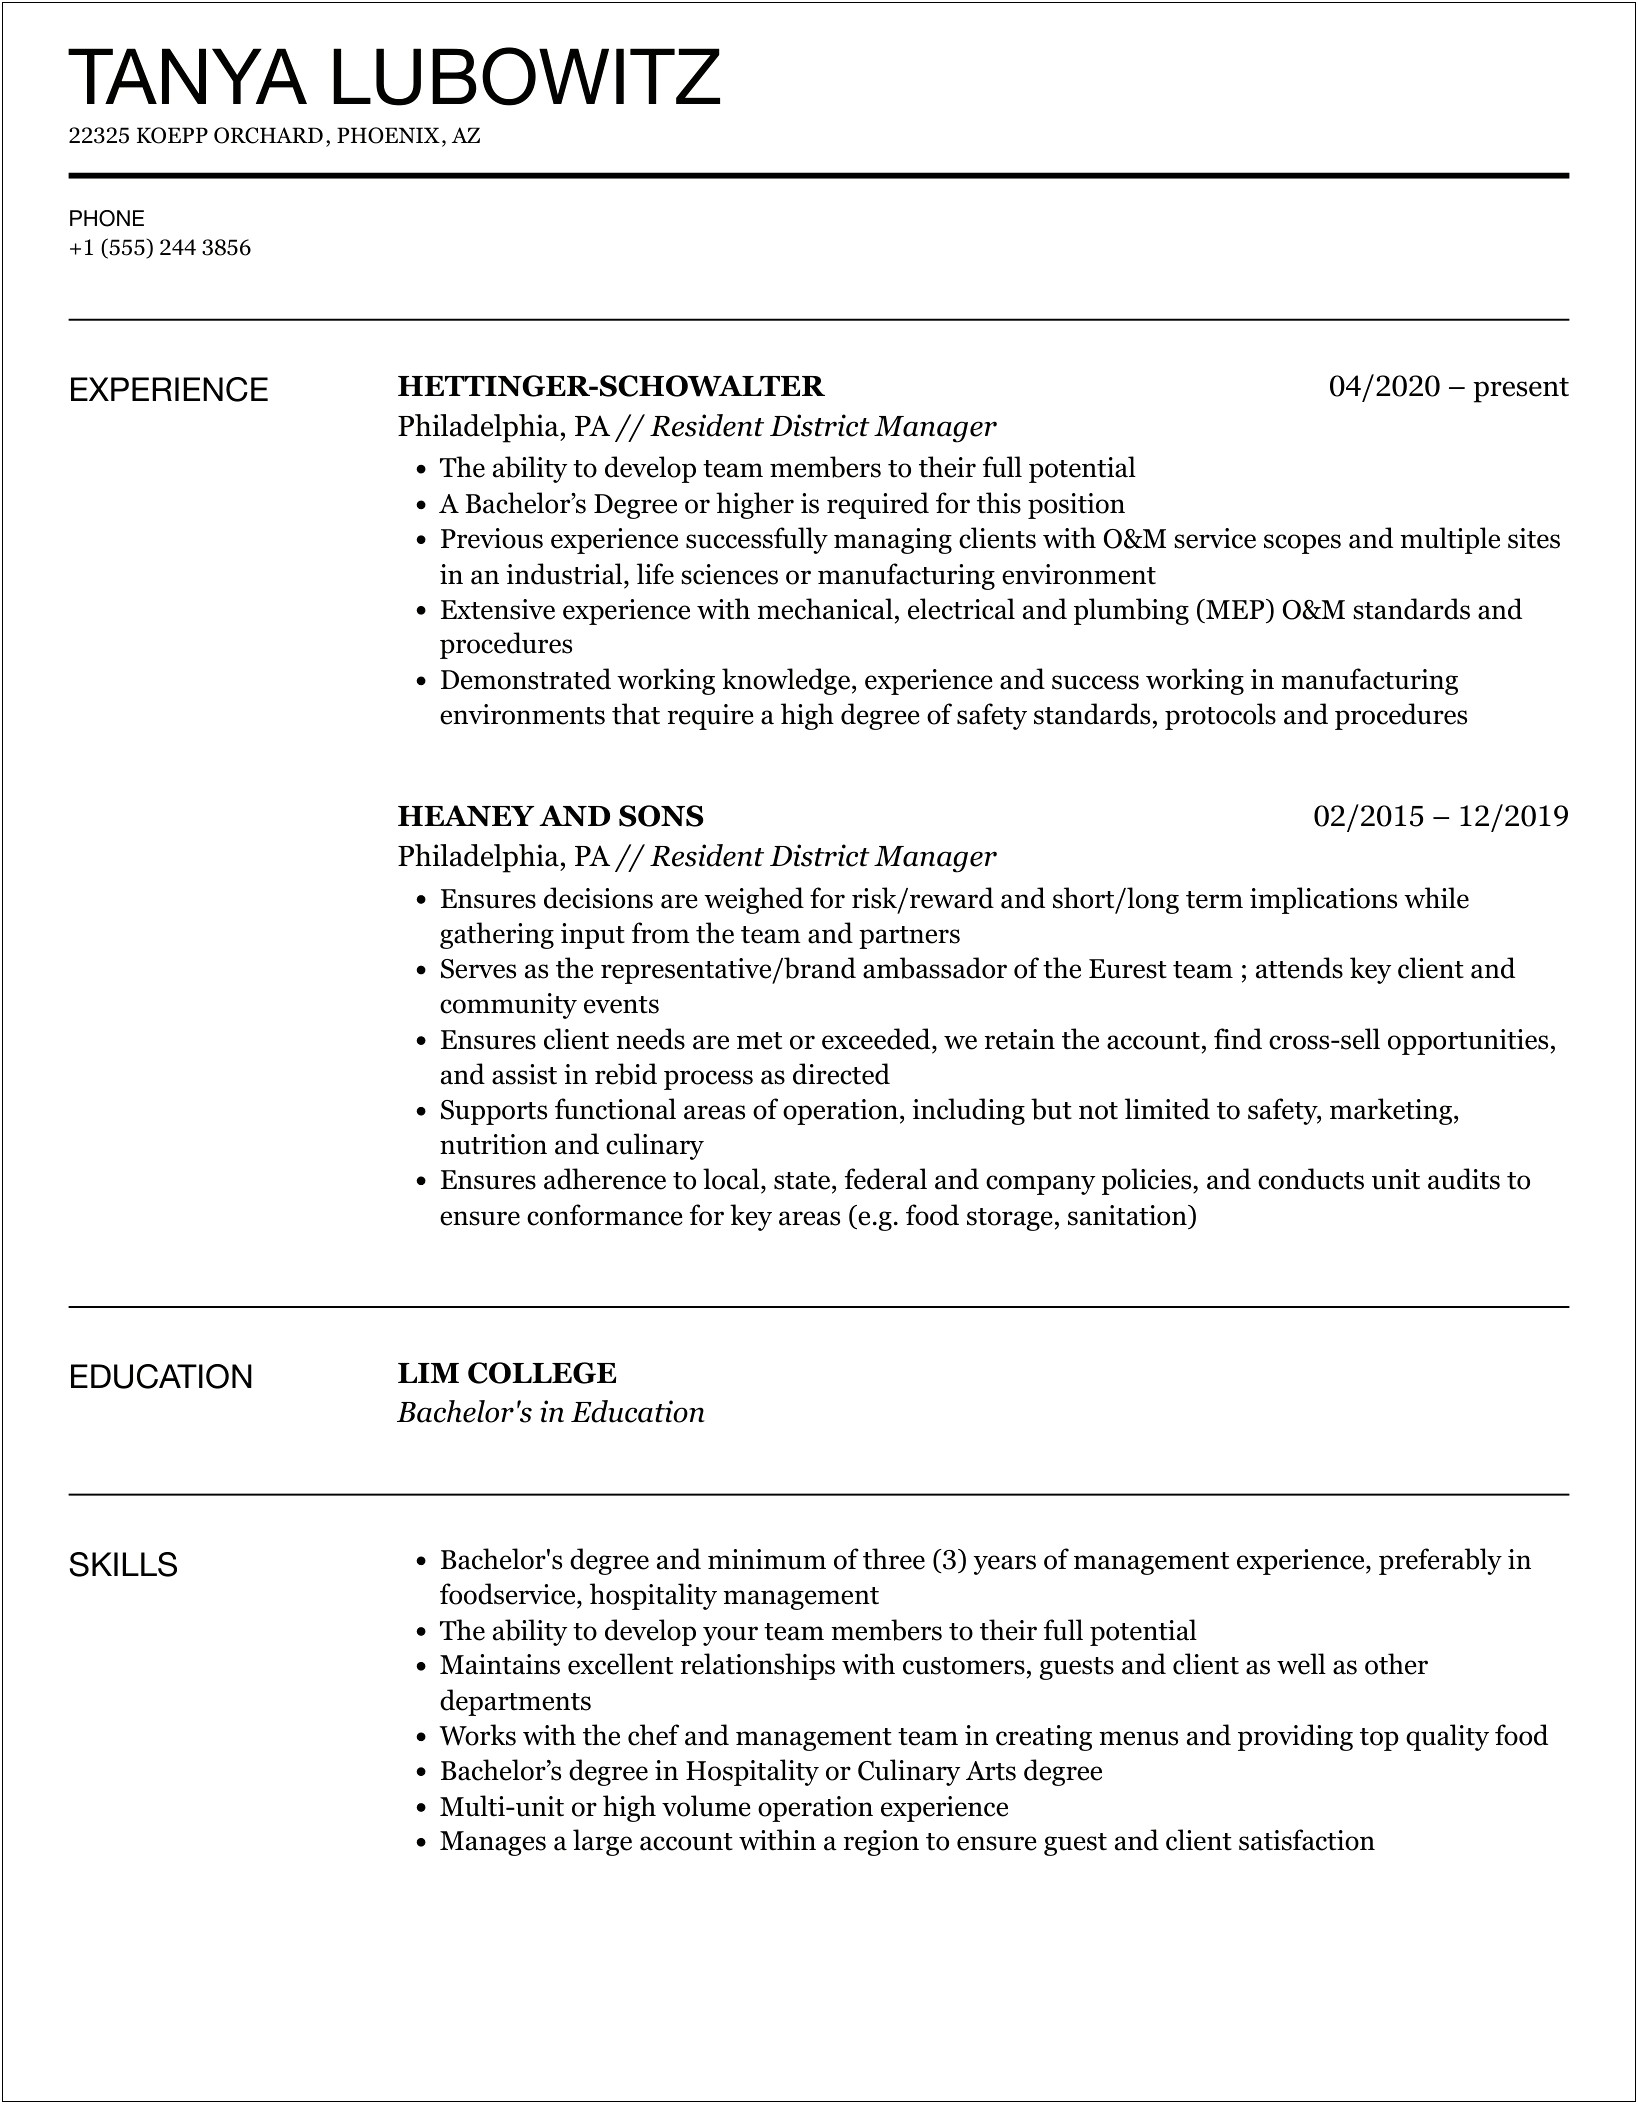 Best Resume For Multi Family District Manager